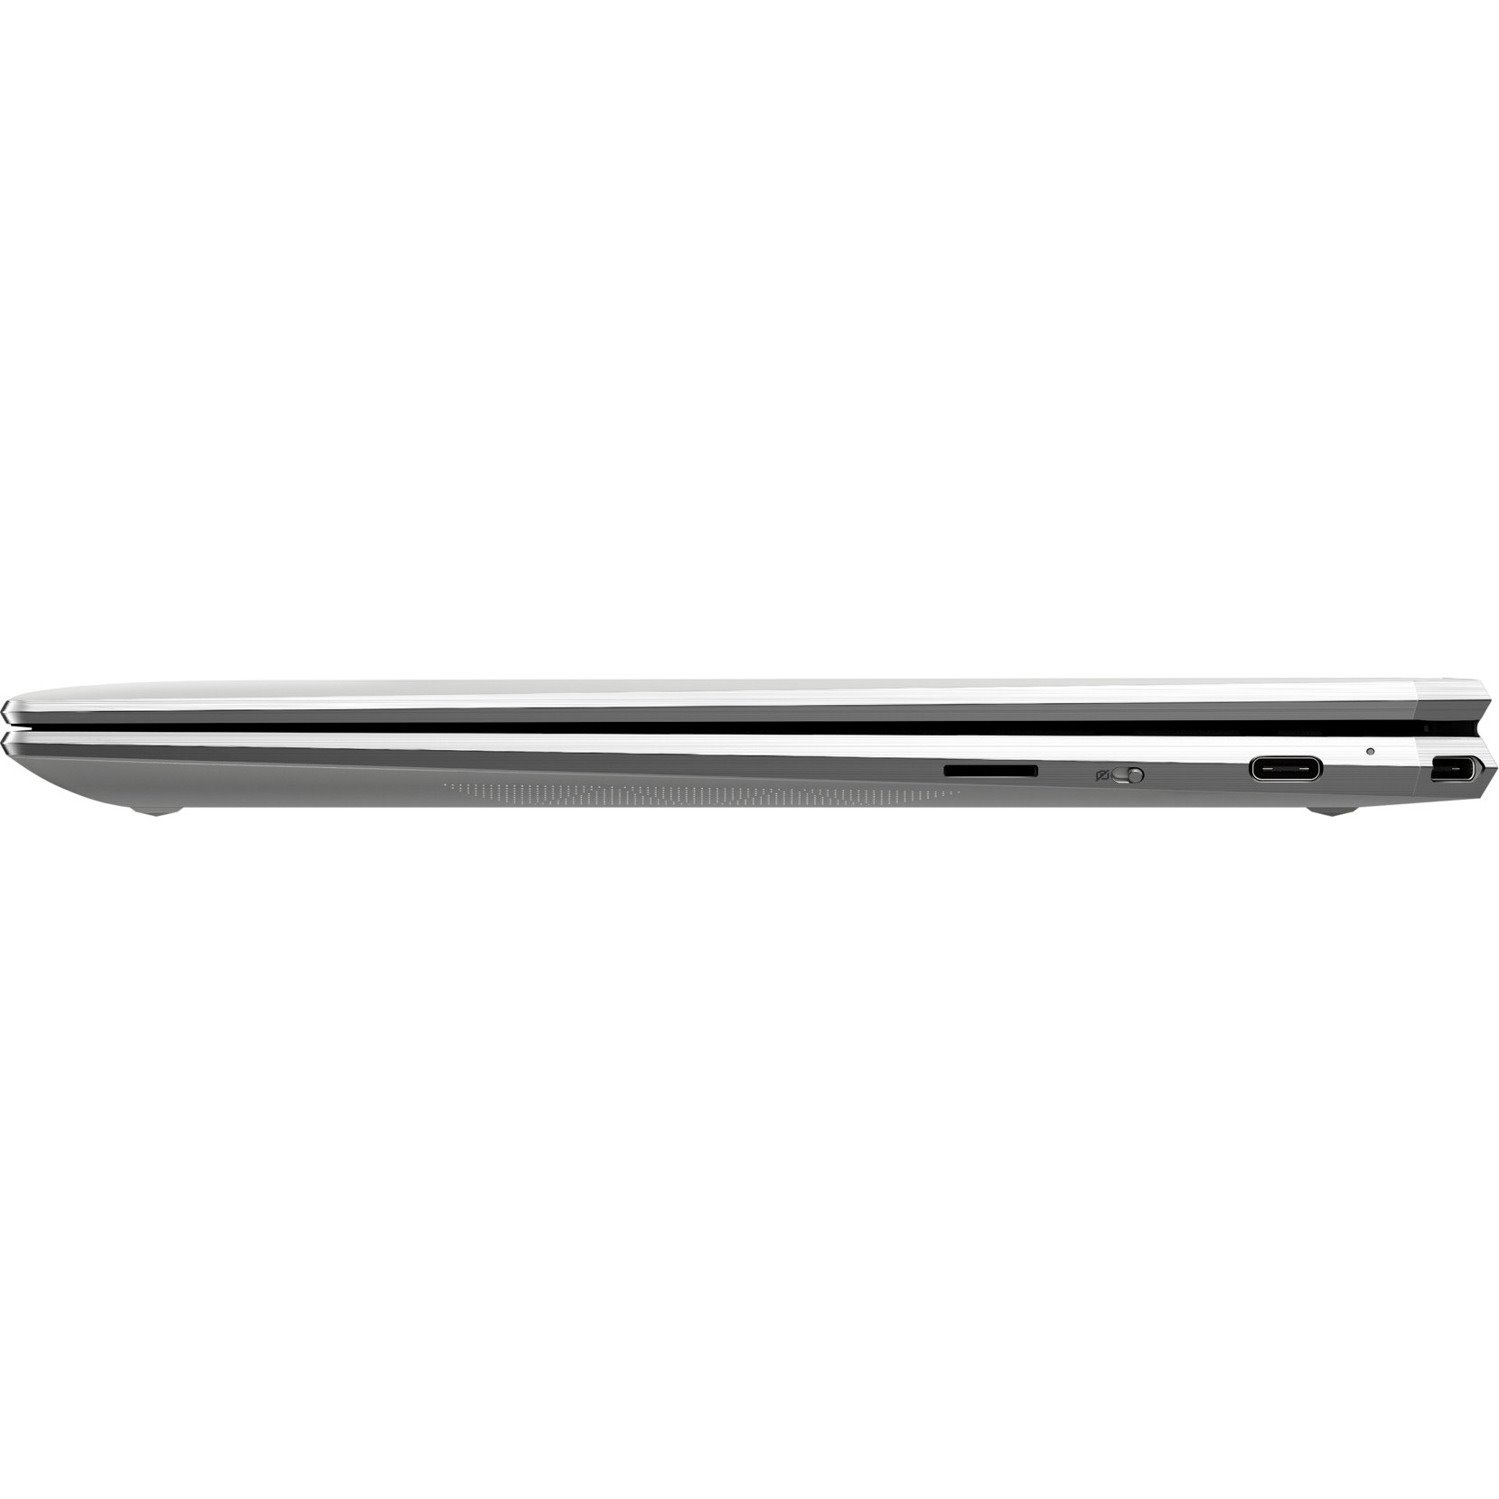 HP Spectre x360 13-aw0000 13-aw0125tu 33.8 cm (13.3") Touchscreen Convertible 2 in 1 Notebook - 1920 x 1080 - Intel Core i7 10th Gen i7-1065G7 Quad-core (4 Core) 1.30 GHz - 16 GB Total RAM - 1 TB SSD - Natural Silver